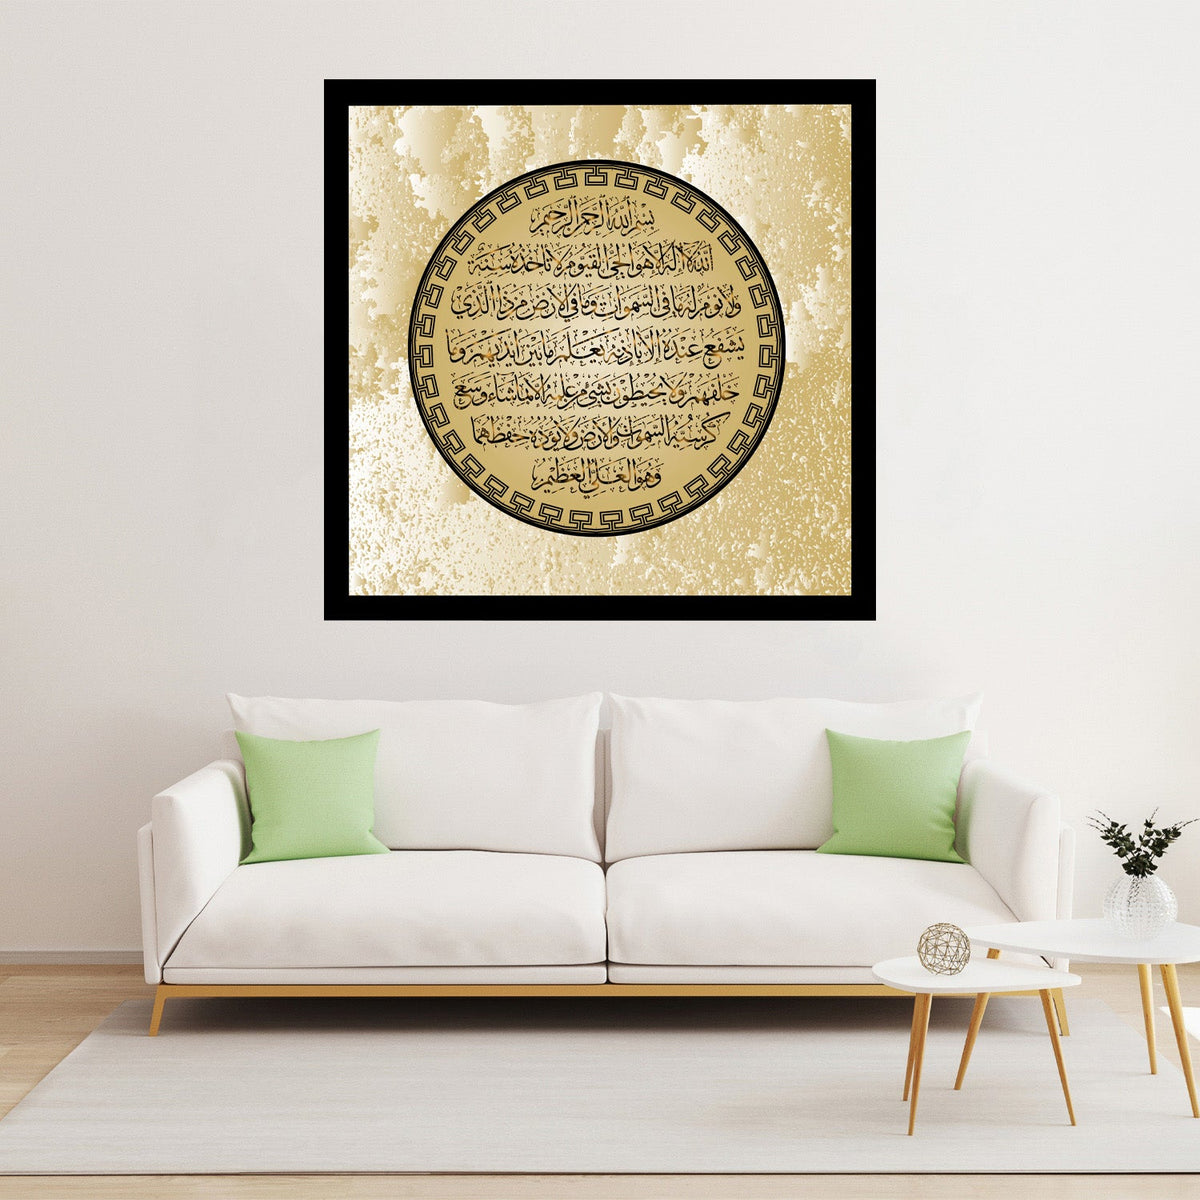 https://cdn.shopify.com/s/files/1/0387/9986/8044/products/255AyahIslamicLimitedEdition10CanvasArtprintStretched-1.jpg